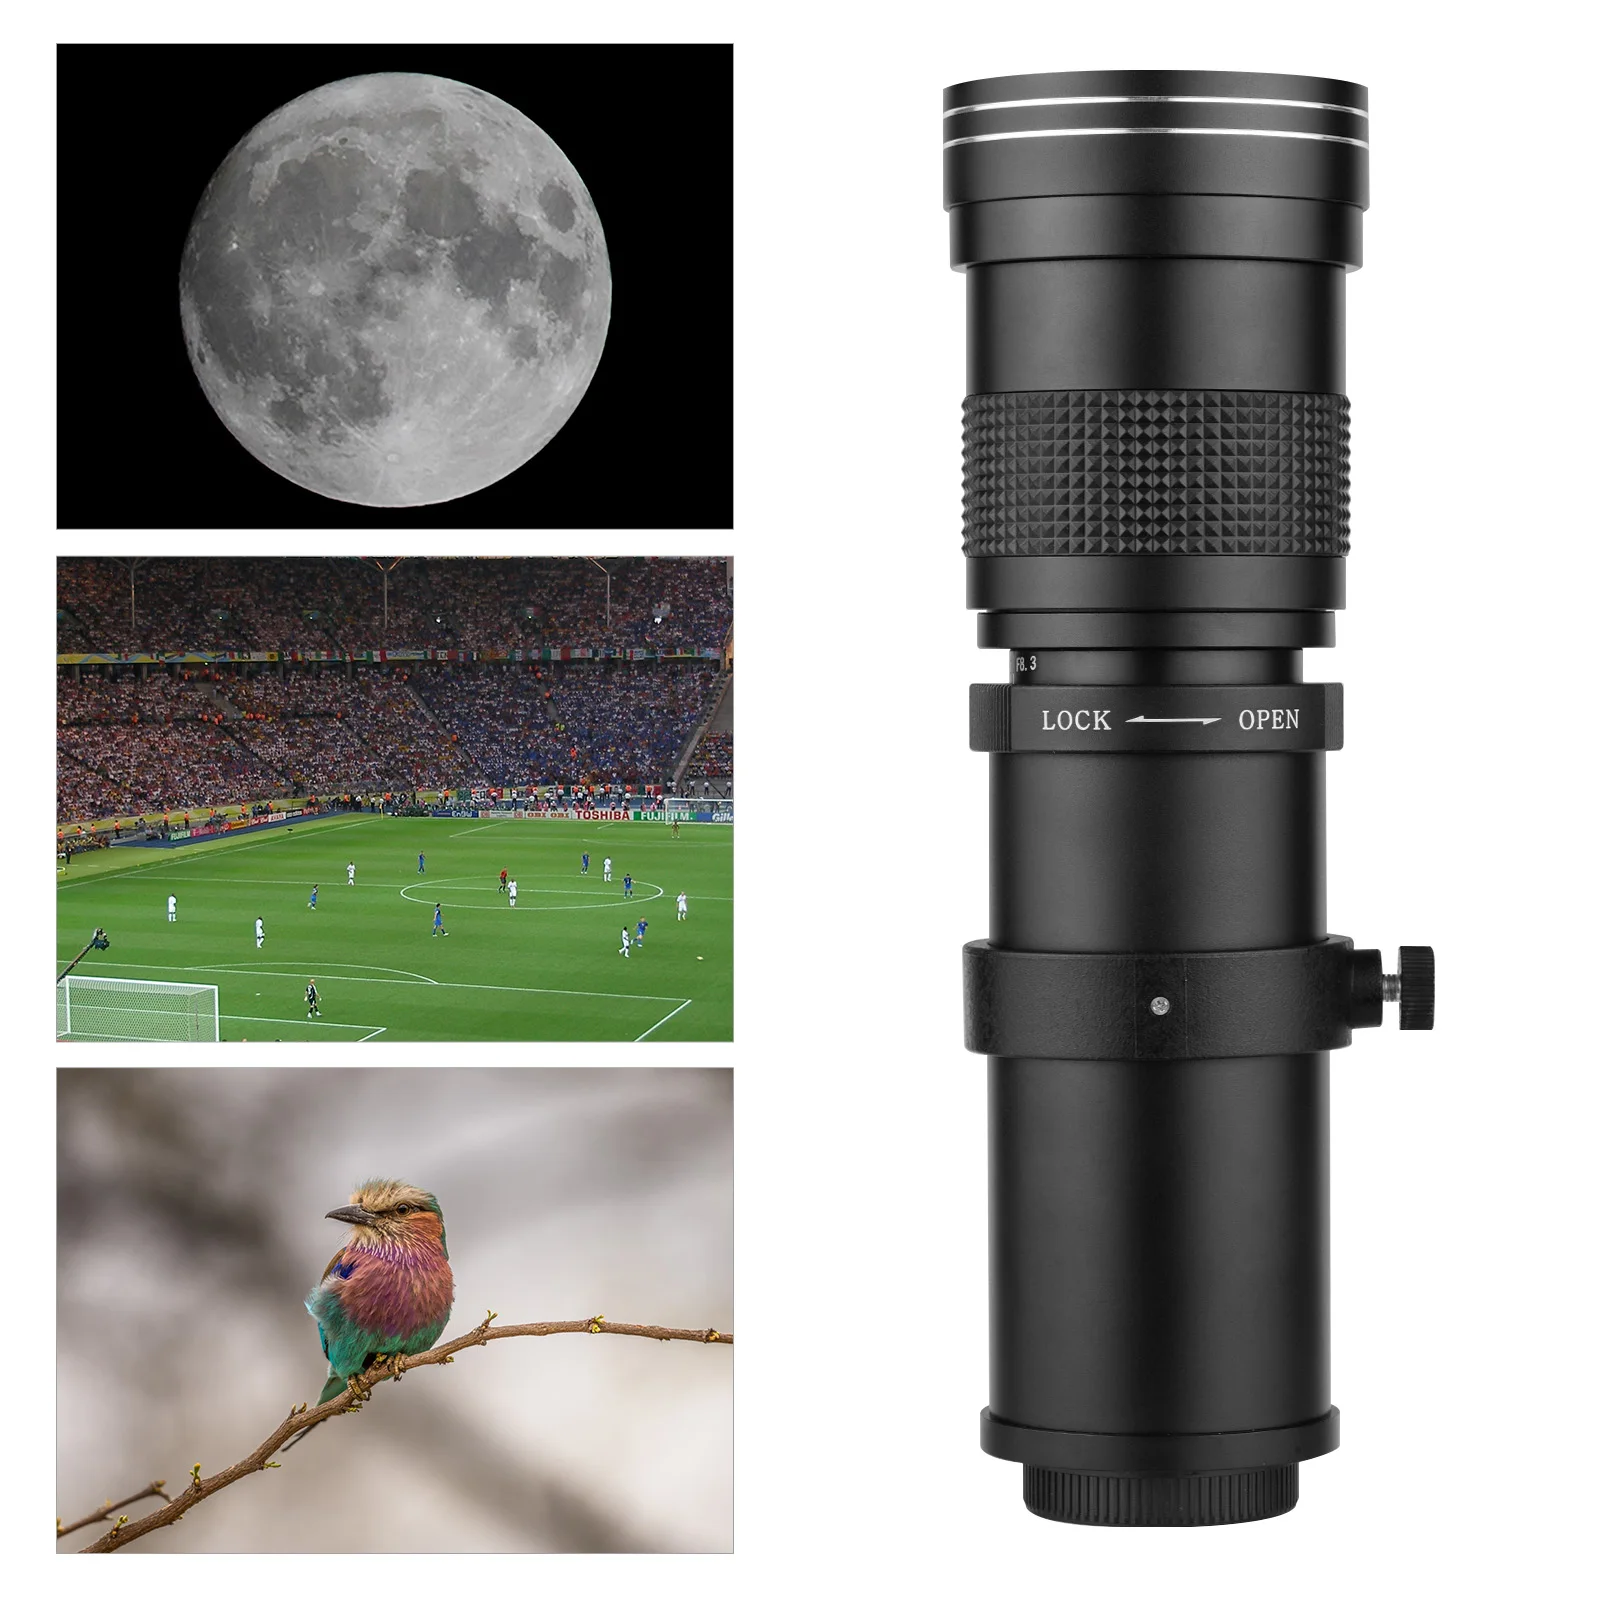 Camera Lens MF Super Telephoto Zoom Lens F/8.3-16 420-800mm T Mount with for Canon Nikon Sony Fujifilm Olympus Cameras Lens